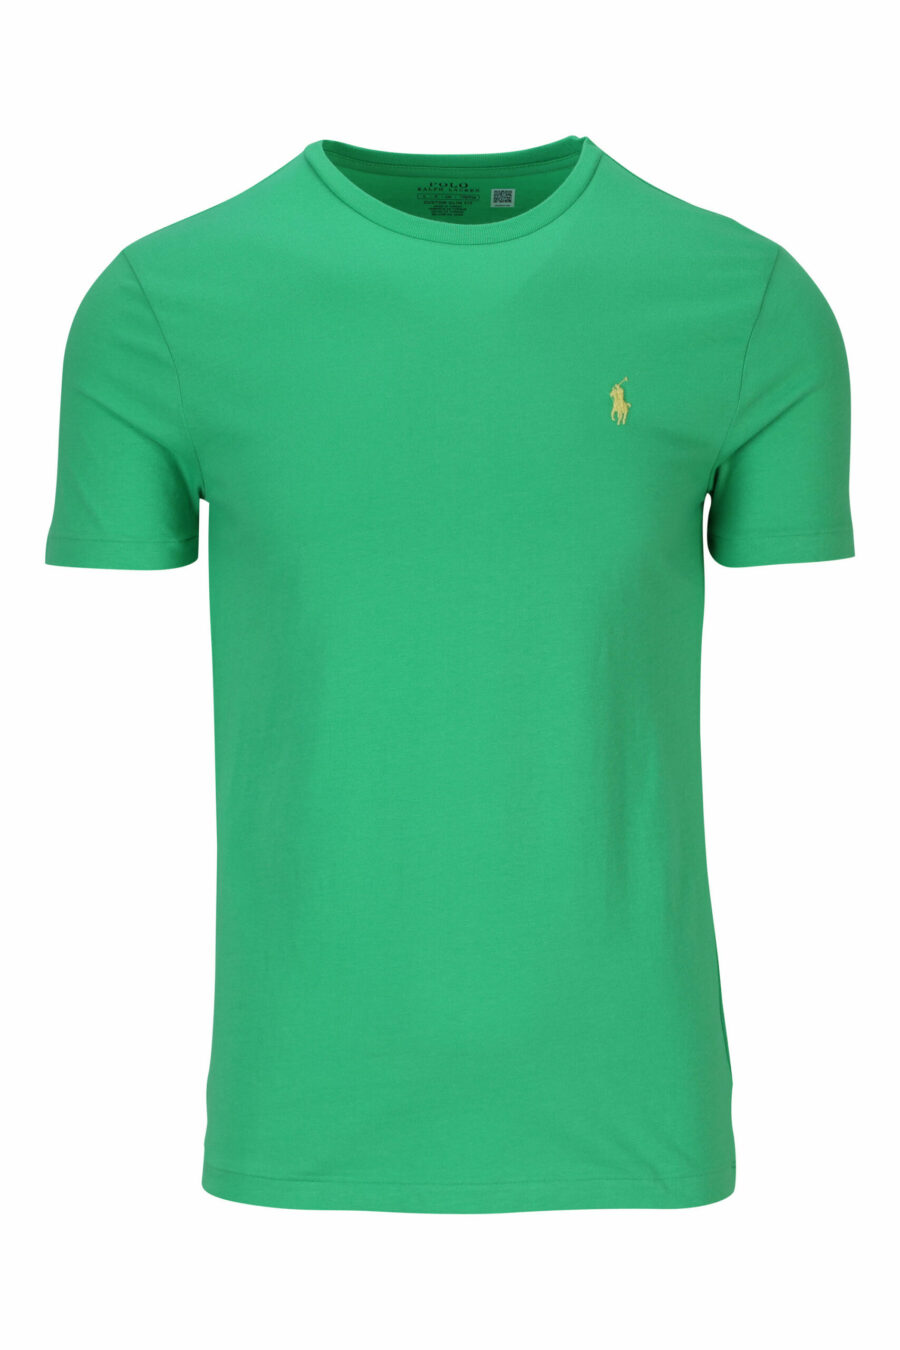 Green and yellow T-shirt with mini-logo "polo" - 3616535653825 scaled